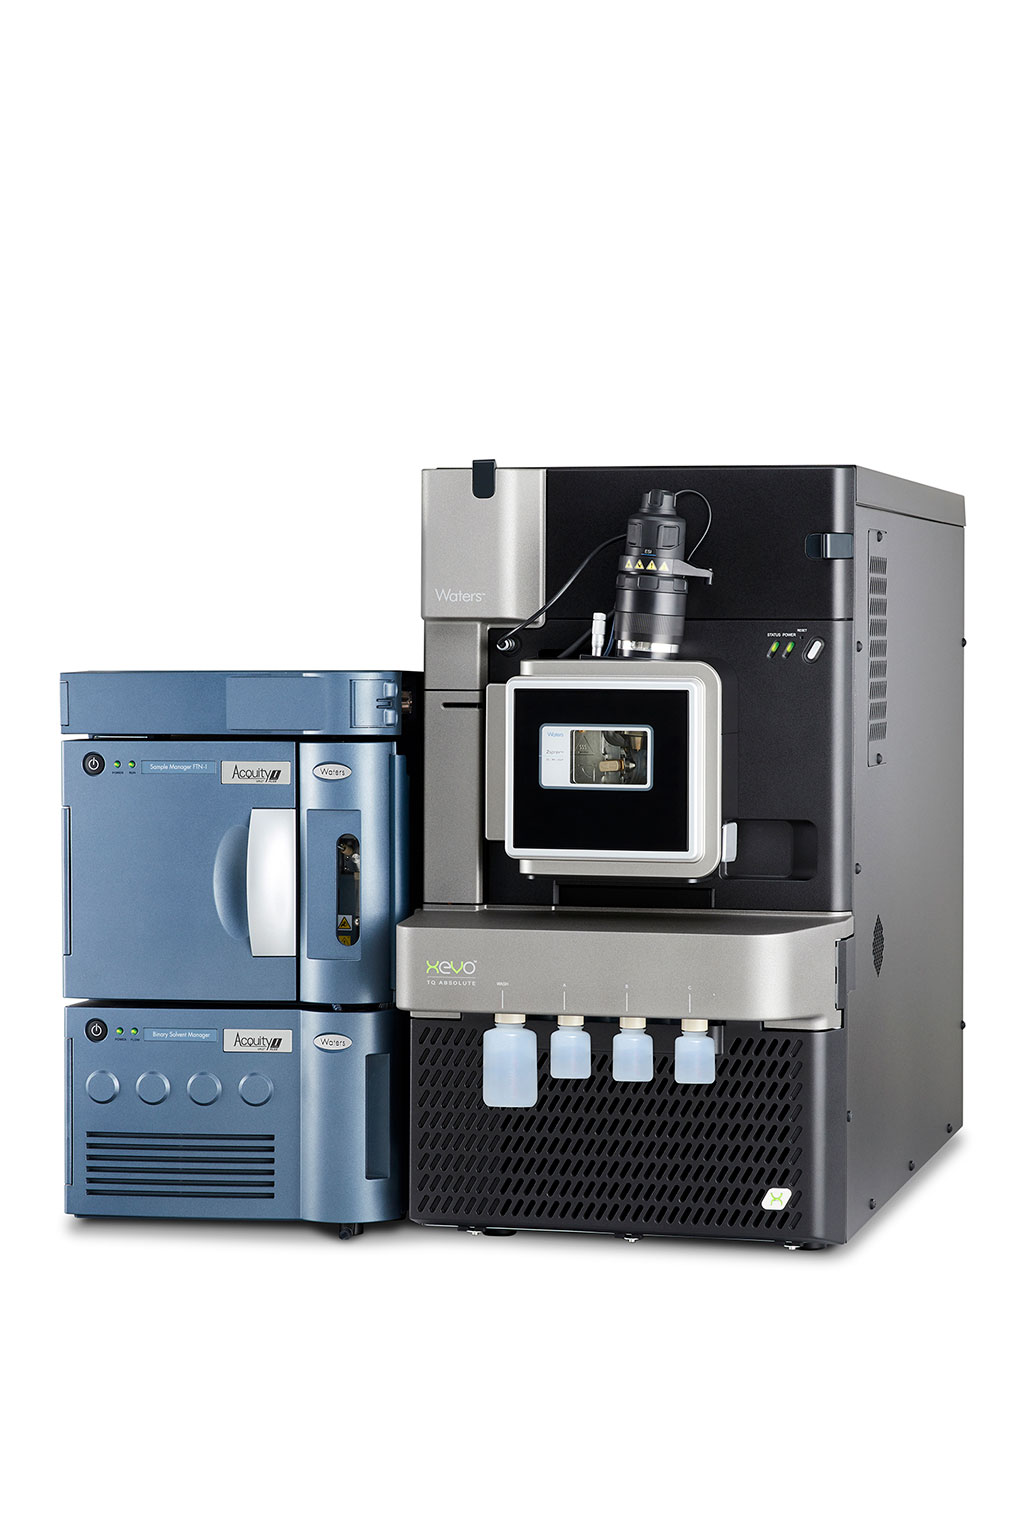 Image: The new MassTrak IVD LC-MS/MS System featuring the Xevo TQ Absolute IVD tandem quadrupole mass spectrometer (Photo courtesy of Waters)